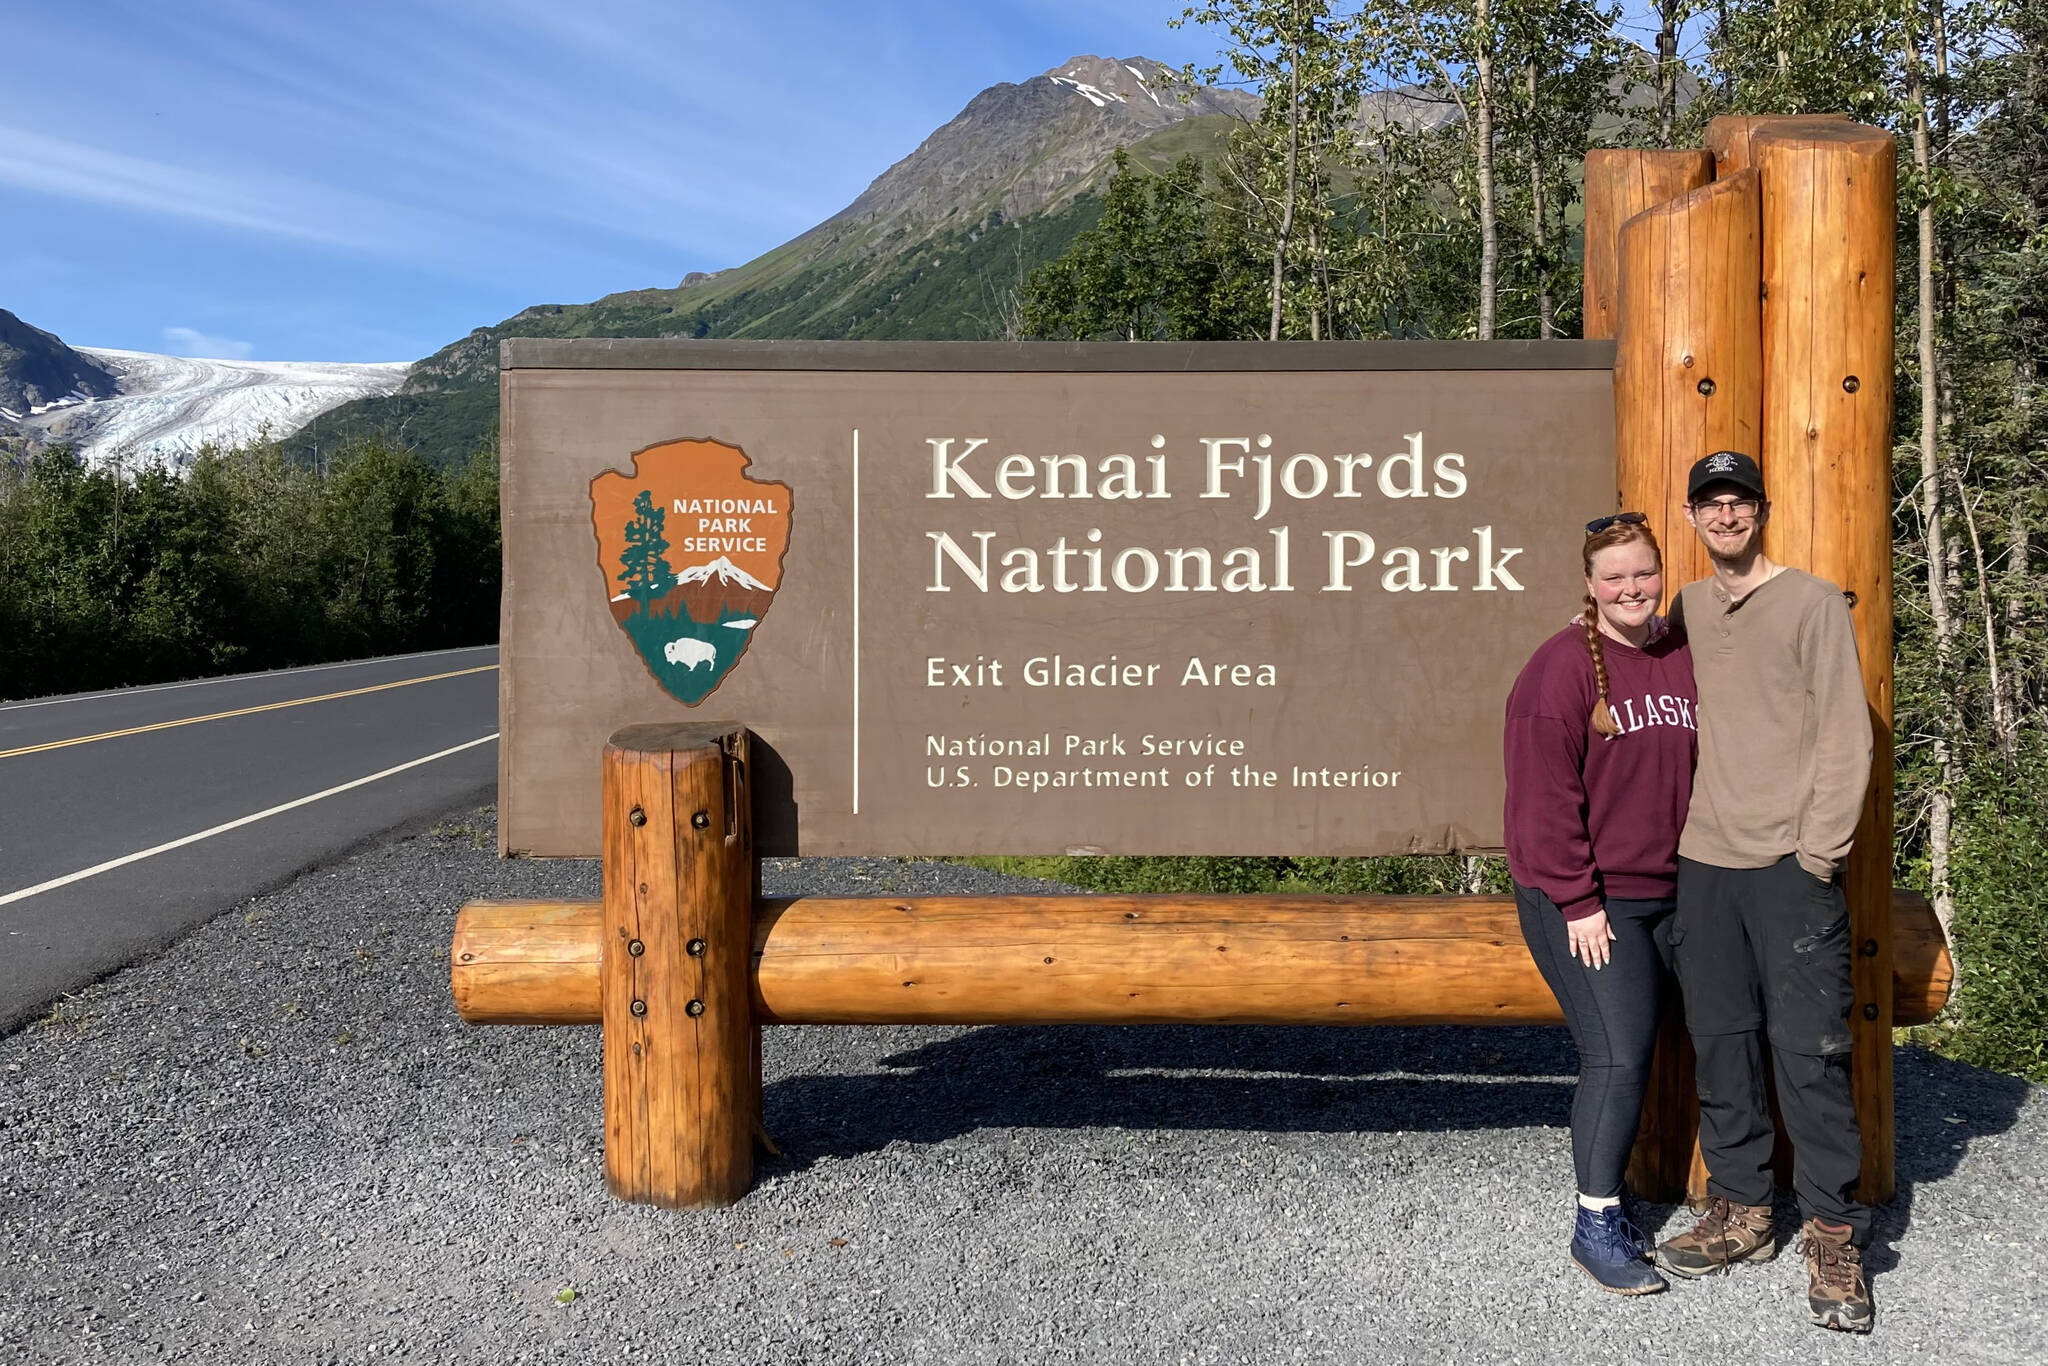 Sarah and Michael, along with family, hiked a trail to see Exit Glacier at the Kenai Fjords National Park in Seward.